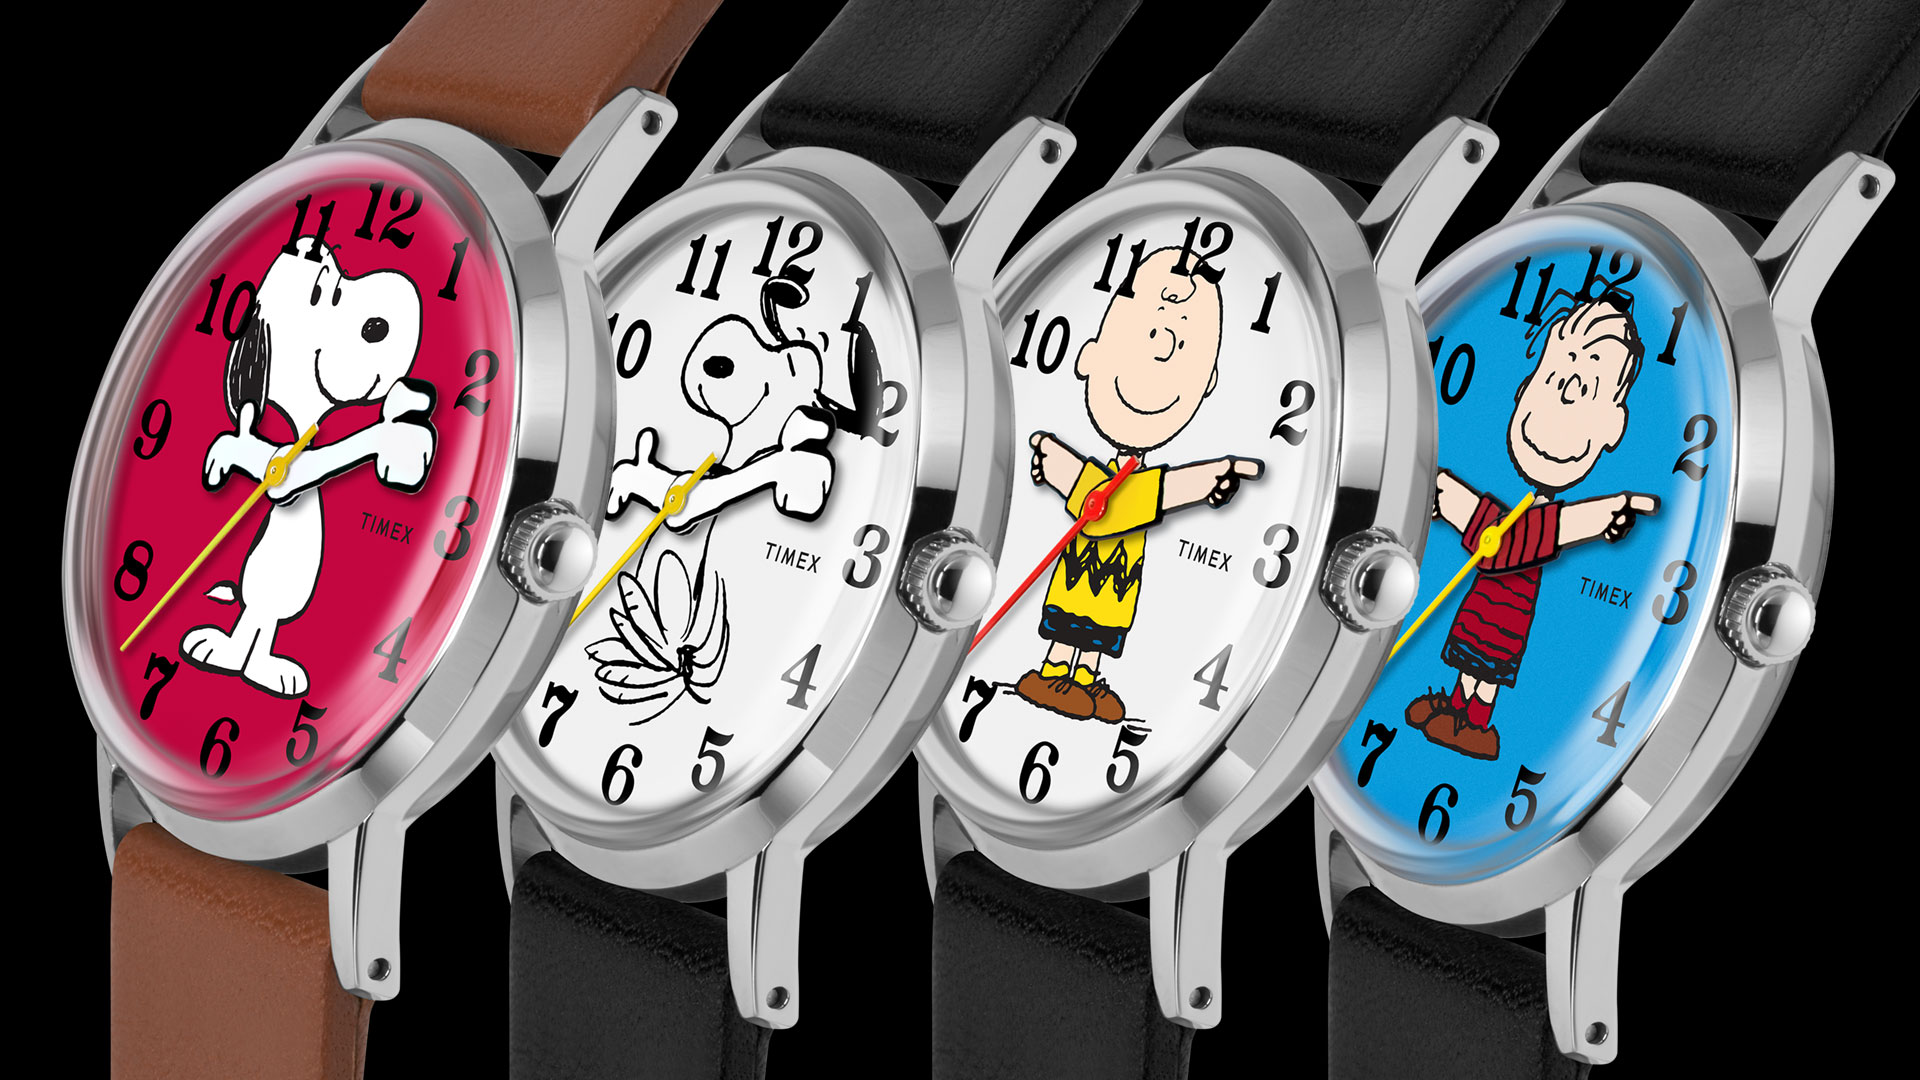 Timex Peanuts Watches For Todd Snyder | aBlogtoWatch